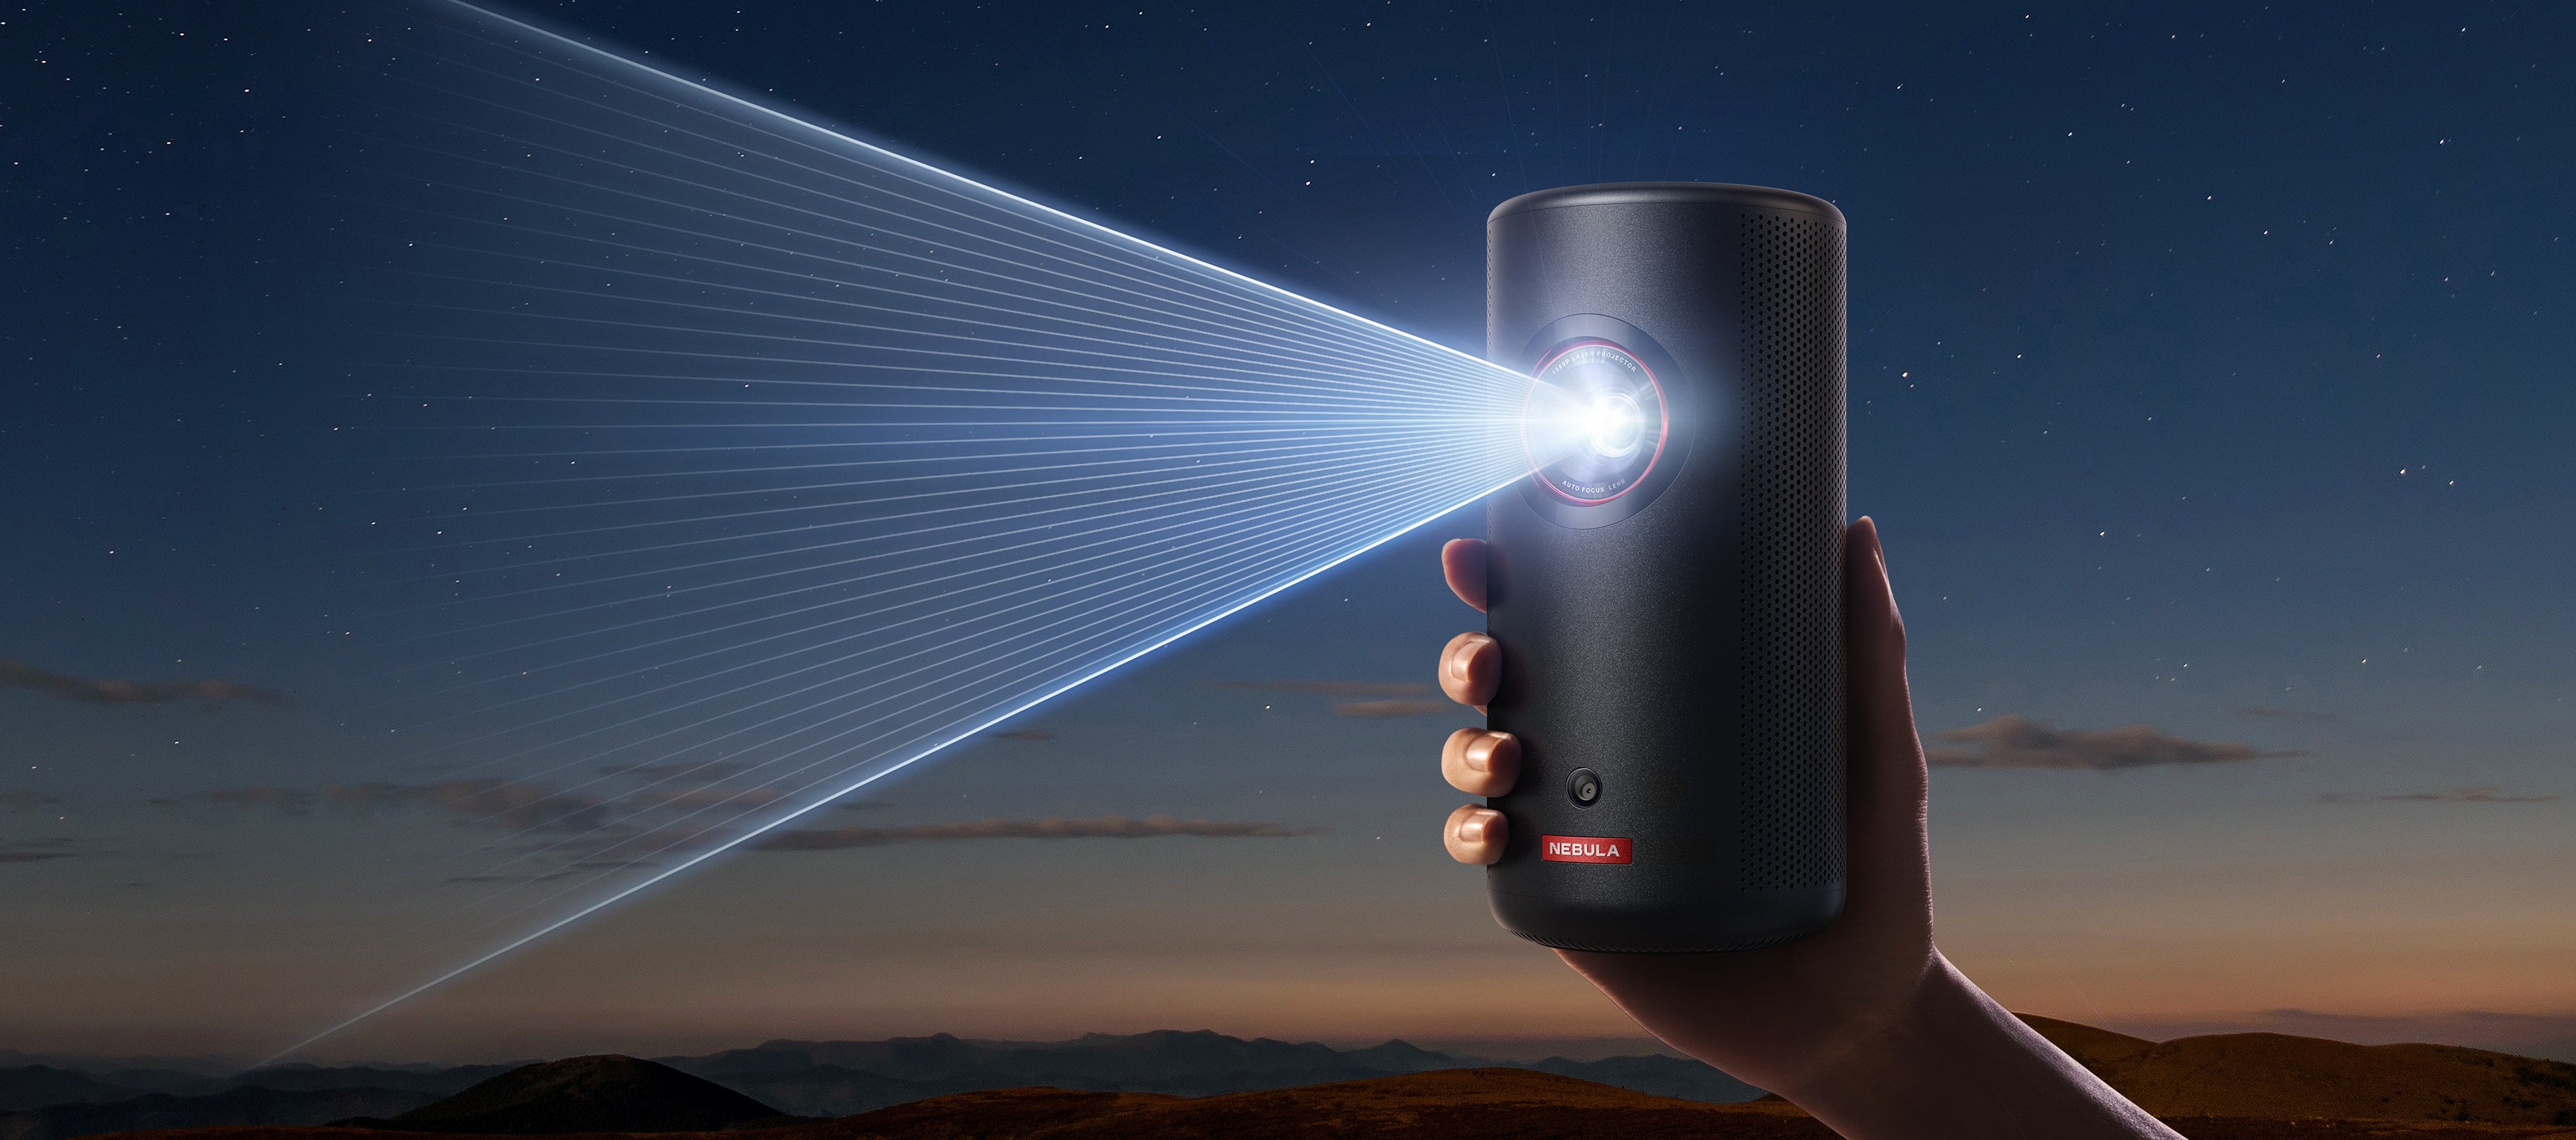 20221013 102057 Nebula &Lt;H1 Class=&Quot;A-Size-Large A-Spacing-None&Quot;&Gt;Anker Nebula Capsule 3 Laser 1080P Mini Projector - Black D2426211&Lt;/H1&Gt; Https://Www.youtube.com/Watch?V=Wb6_0Khv5I0 &Lt;Ul&Gt; &Lt;Li&Gt;&Lt;Strong&Gt;Laser-Bright 300 Ansi Lumens | 1080P Laser Hd Clarity&Lt;/Strong&Gt;&Lt;/Li&Gt; &Lt;Li&Gt;&Lt;Strong&Gt;90% Smaller Than Similar Projectors&Lt;/Strong&Gt;&Lt;/Li&Gt; &Lt;Li&Gt;&Lt;Strong&Gt;52Wh Built-In Battery | Play Videos For 2.5 Hours&Lt;/Strong&Gt;&Lt;/Li&Gt; &Lt;Li&Gt;&Lt;Strong&Gt;Watch Or Play With Android Tv 11.0 | Compatible With Netflix&Lt;/Strong&Gt;&Lt;/Li&Gt; &Lt;Li&Gt;&Lt;Strong&Gt;Hi-Fi&Lt;/Strong&Gt;&Lt;Strong&Gt; Cinematic Sound | 8W Dolby Digital Speaker&Lt;/Strong&Gt;&Lt;/Li&Gt; &Lt;/Ul&Gt; &Lt;B&Gt;We Also Provide International Wholesale And Retail Shipping To All Gcc Countries: Saudi Arabia, Qatar, Oman, Kuwait, Bahrain. Warranty : 1 Year Warranty&Lt;/B&Gt; Anker Nebula Capsule 3 Anker Nebula Capsule 3 Laser 1080P Mini Projector - Black D2426211